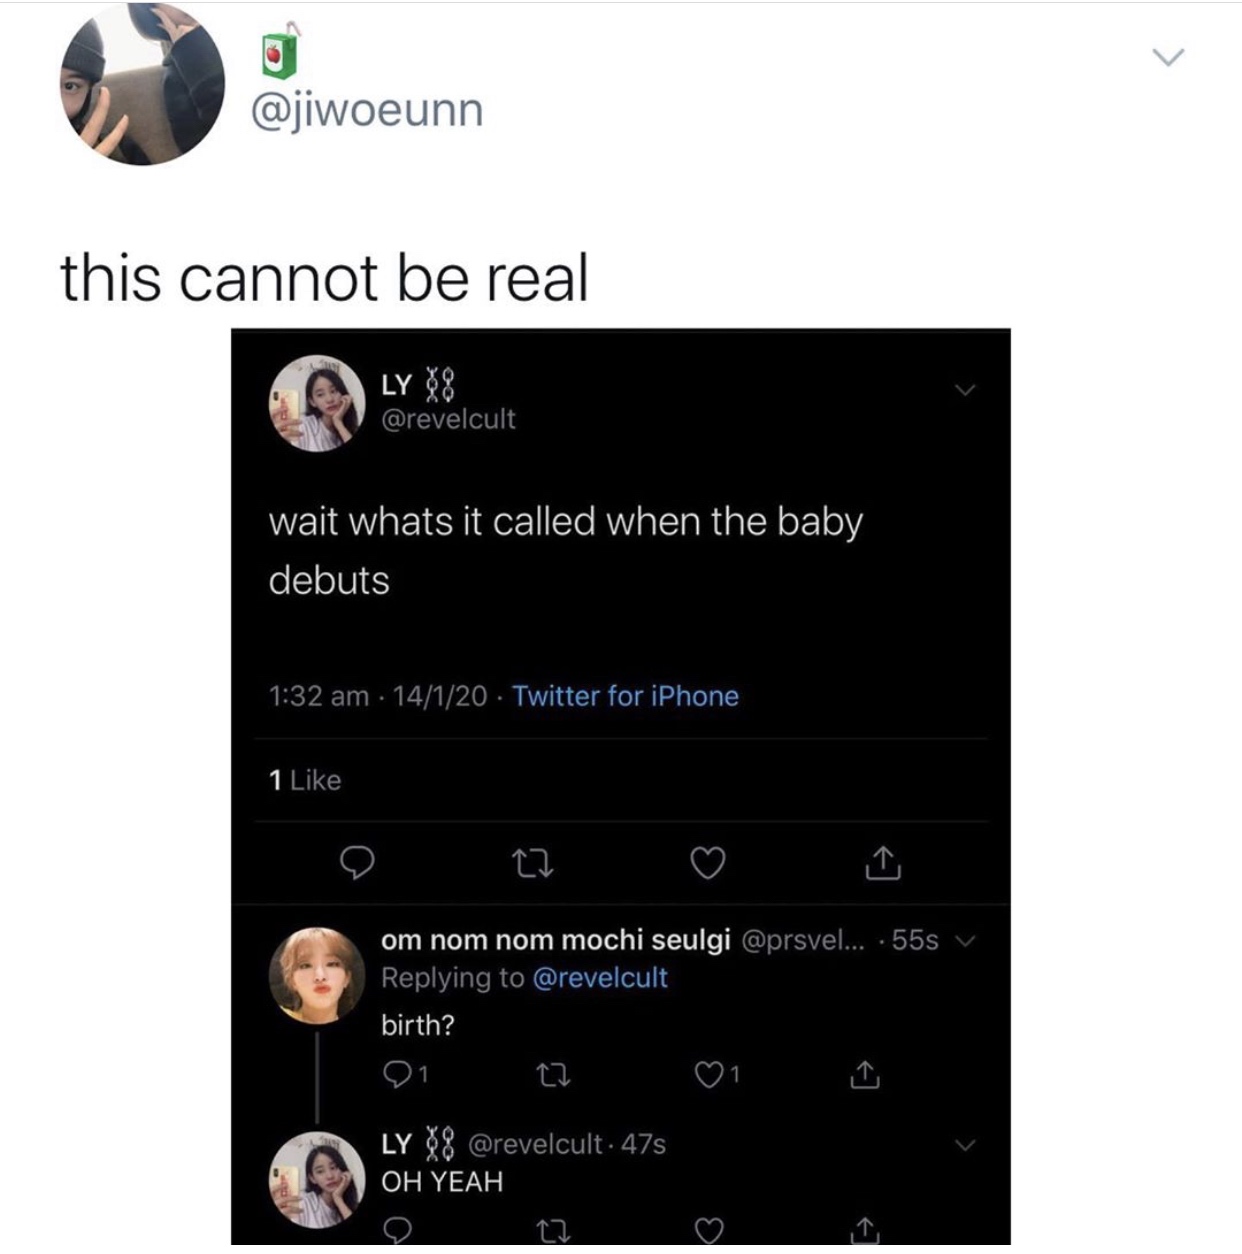 multimedia - this cannot be real Ly wait whats it called when the baby debuts 14120 Twitter for iPhone 1 om nom nom mochi seulgi ... 55s birth? O1 22 LY_88 . 475 Oh Yeah